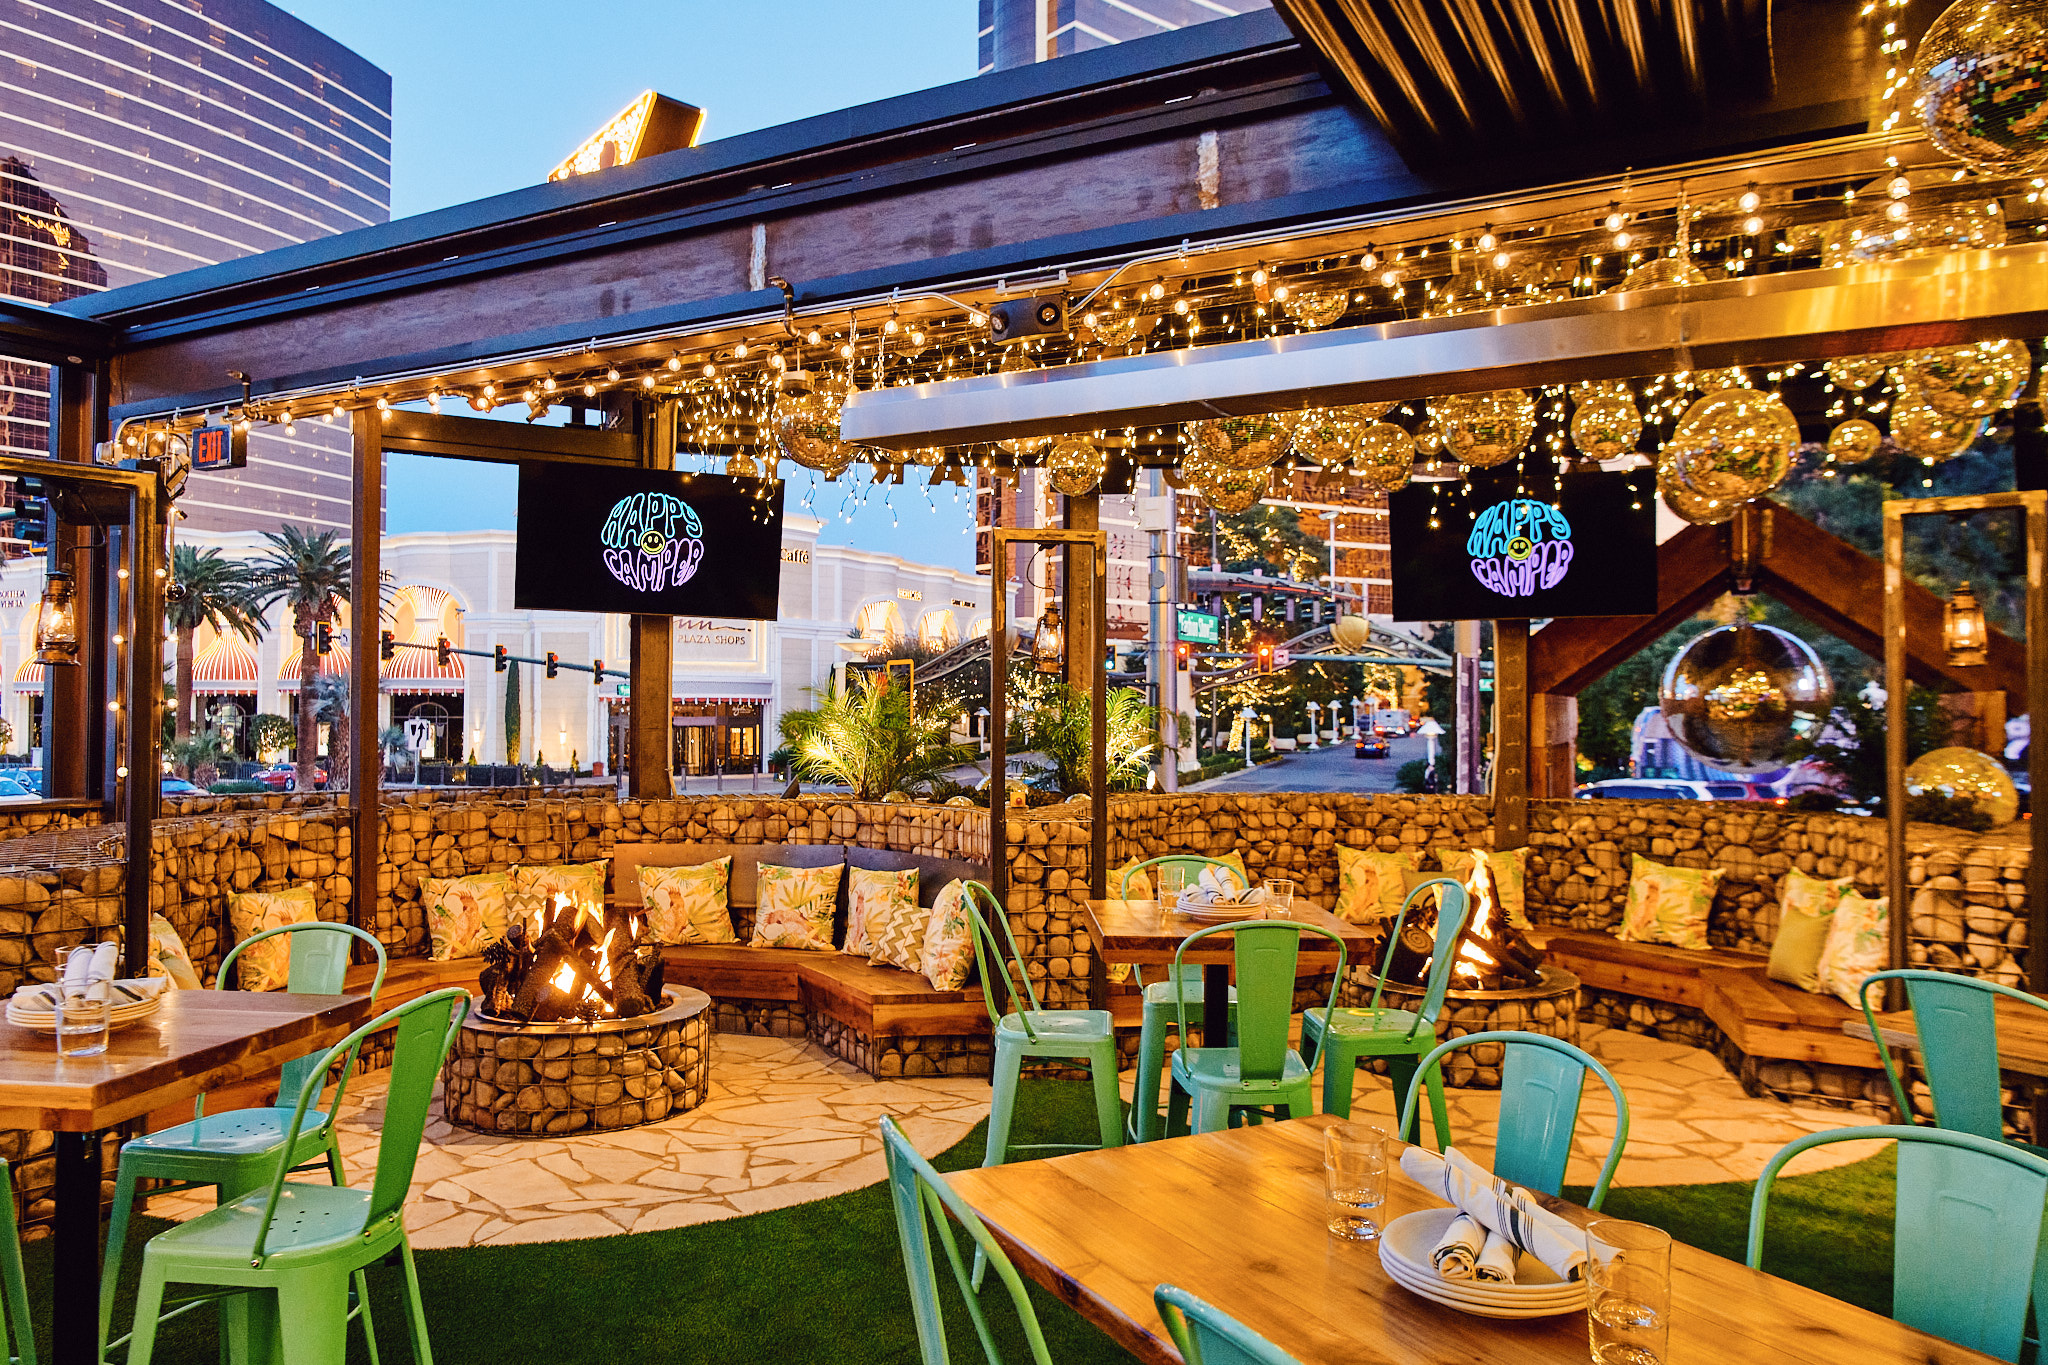 A patio with disco balls, fire pits, and TVs.